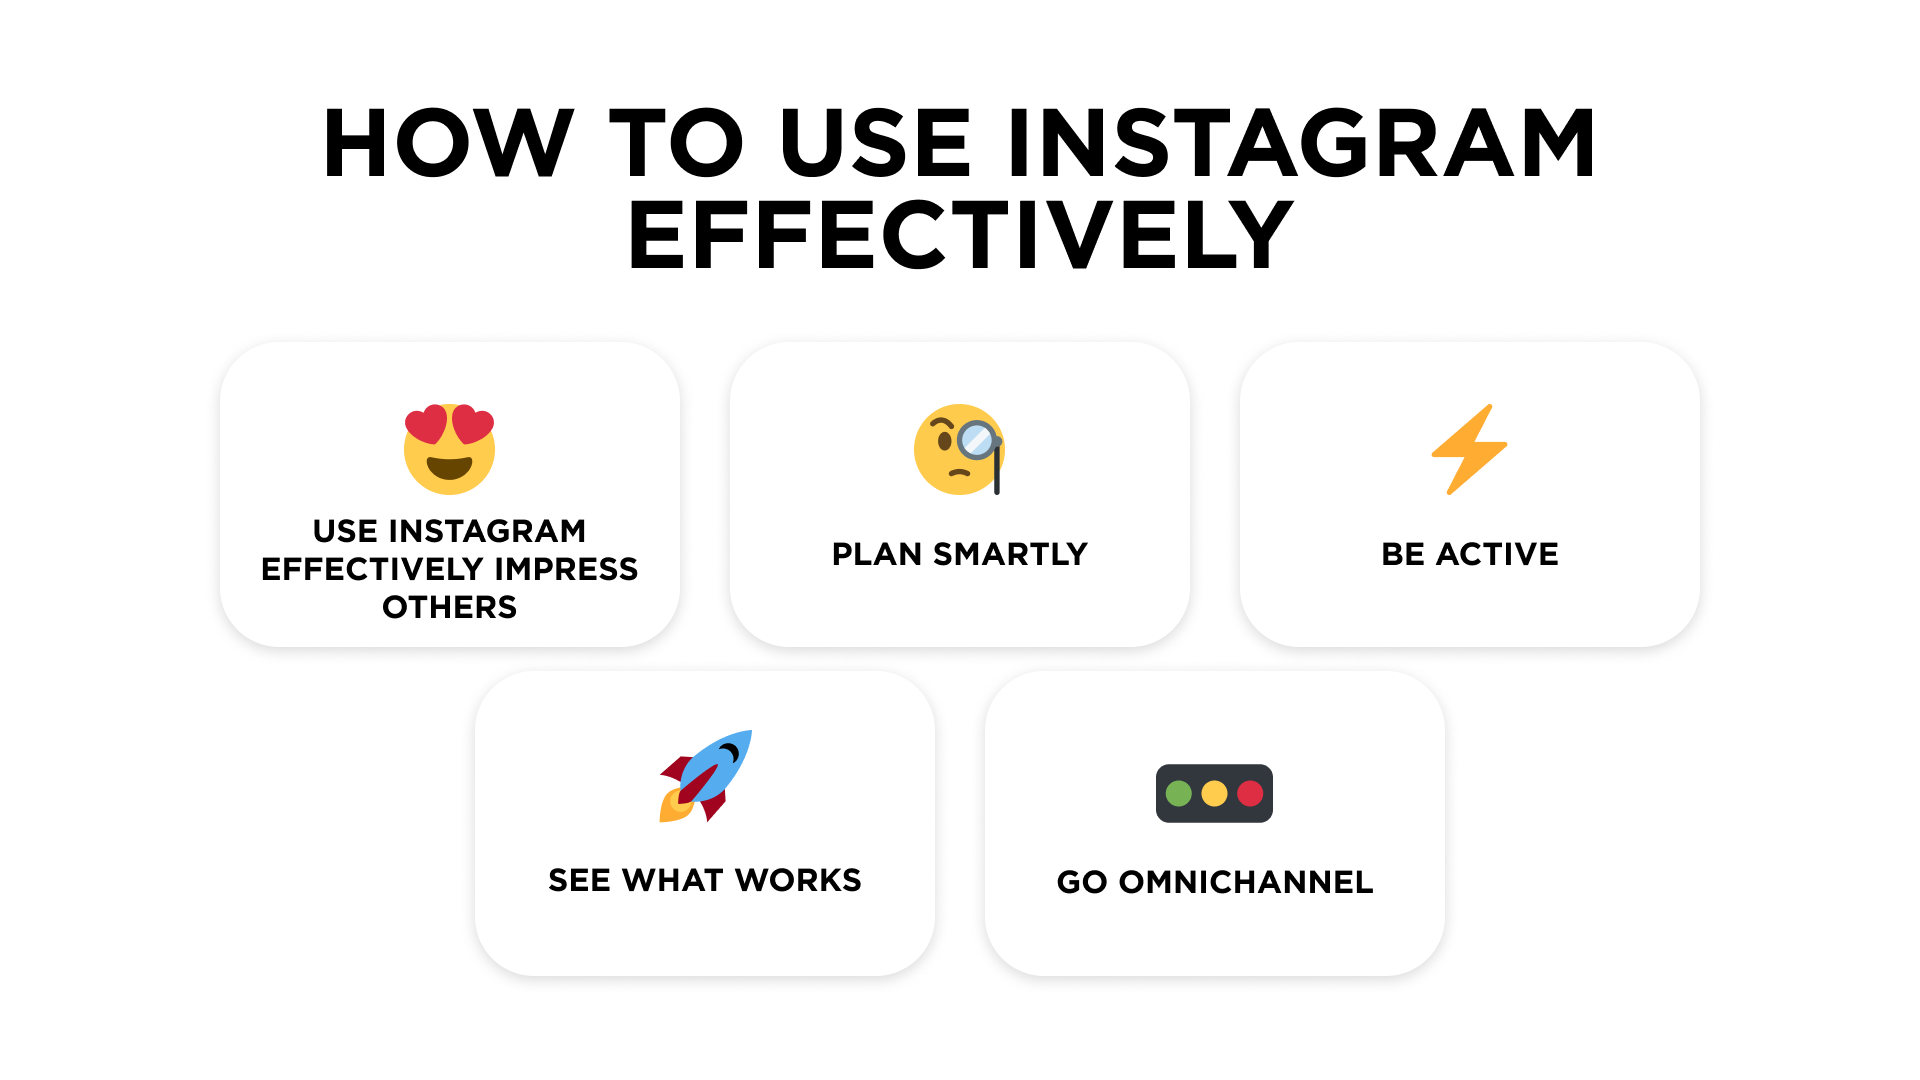 How to use Instagram effectively